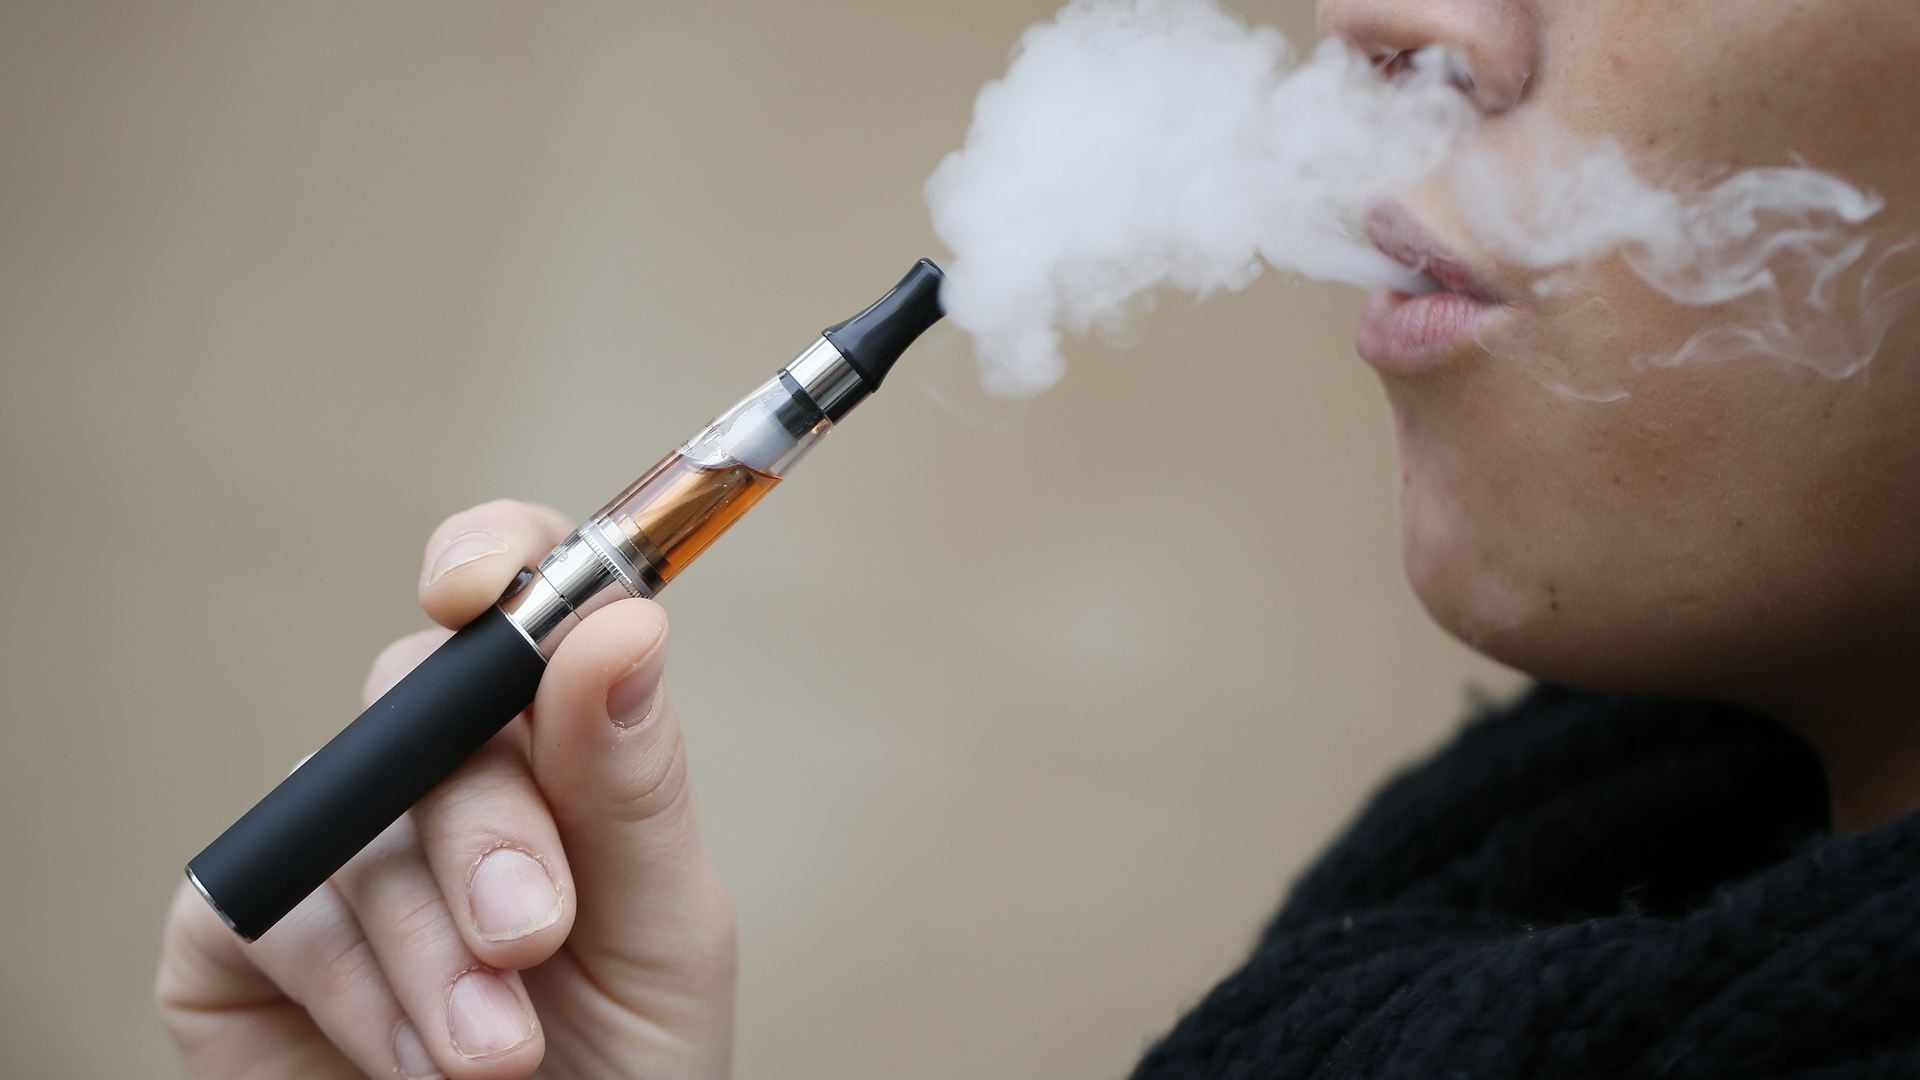 Why Vaping May Be More Dangerous Than Cigarettes